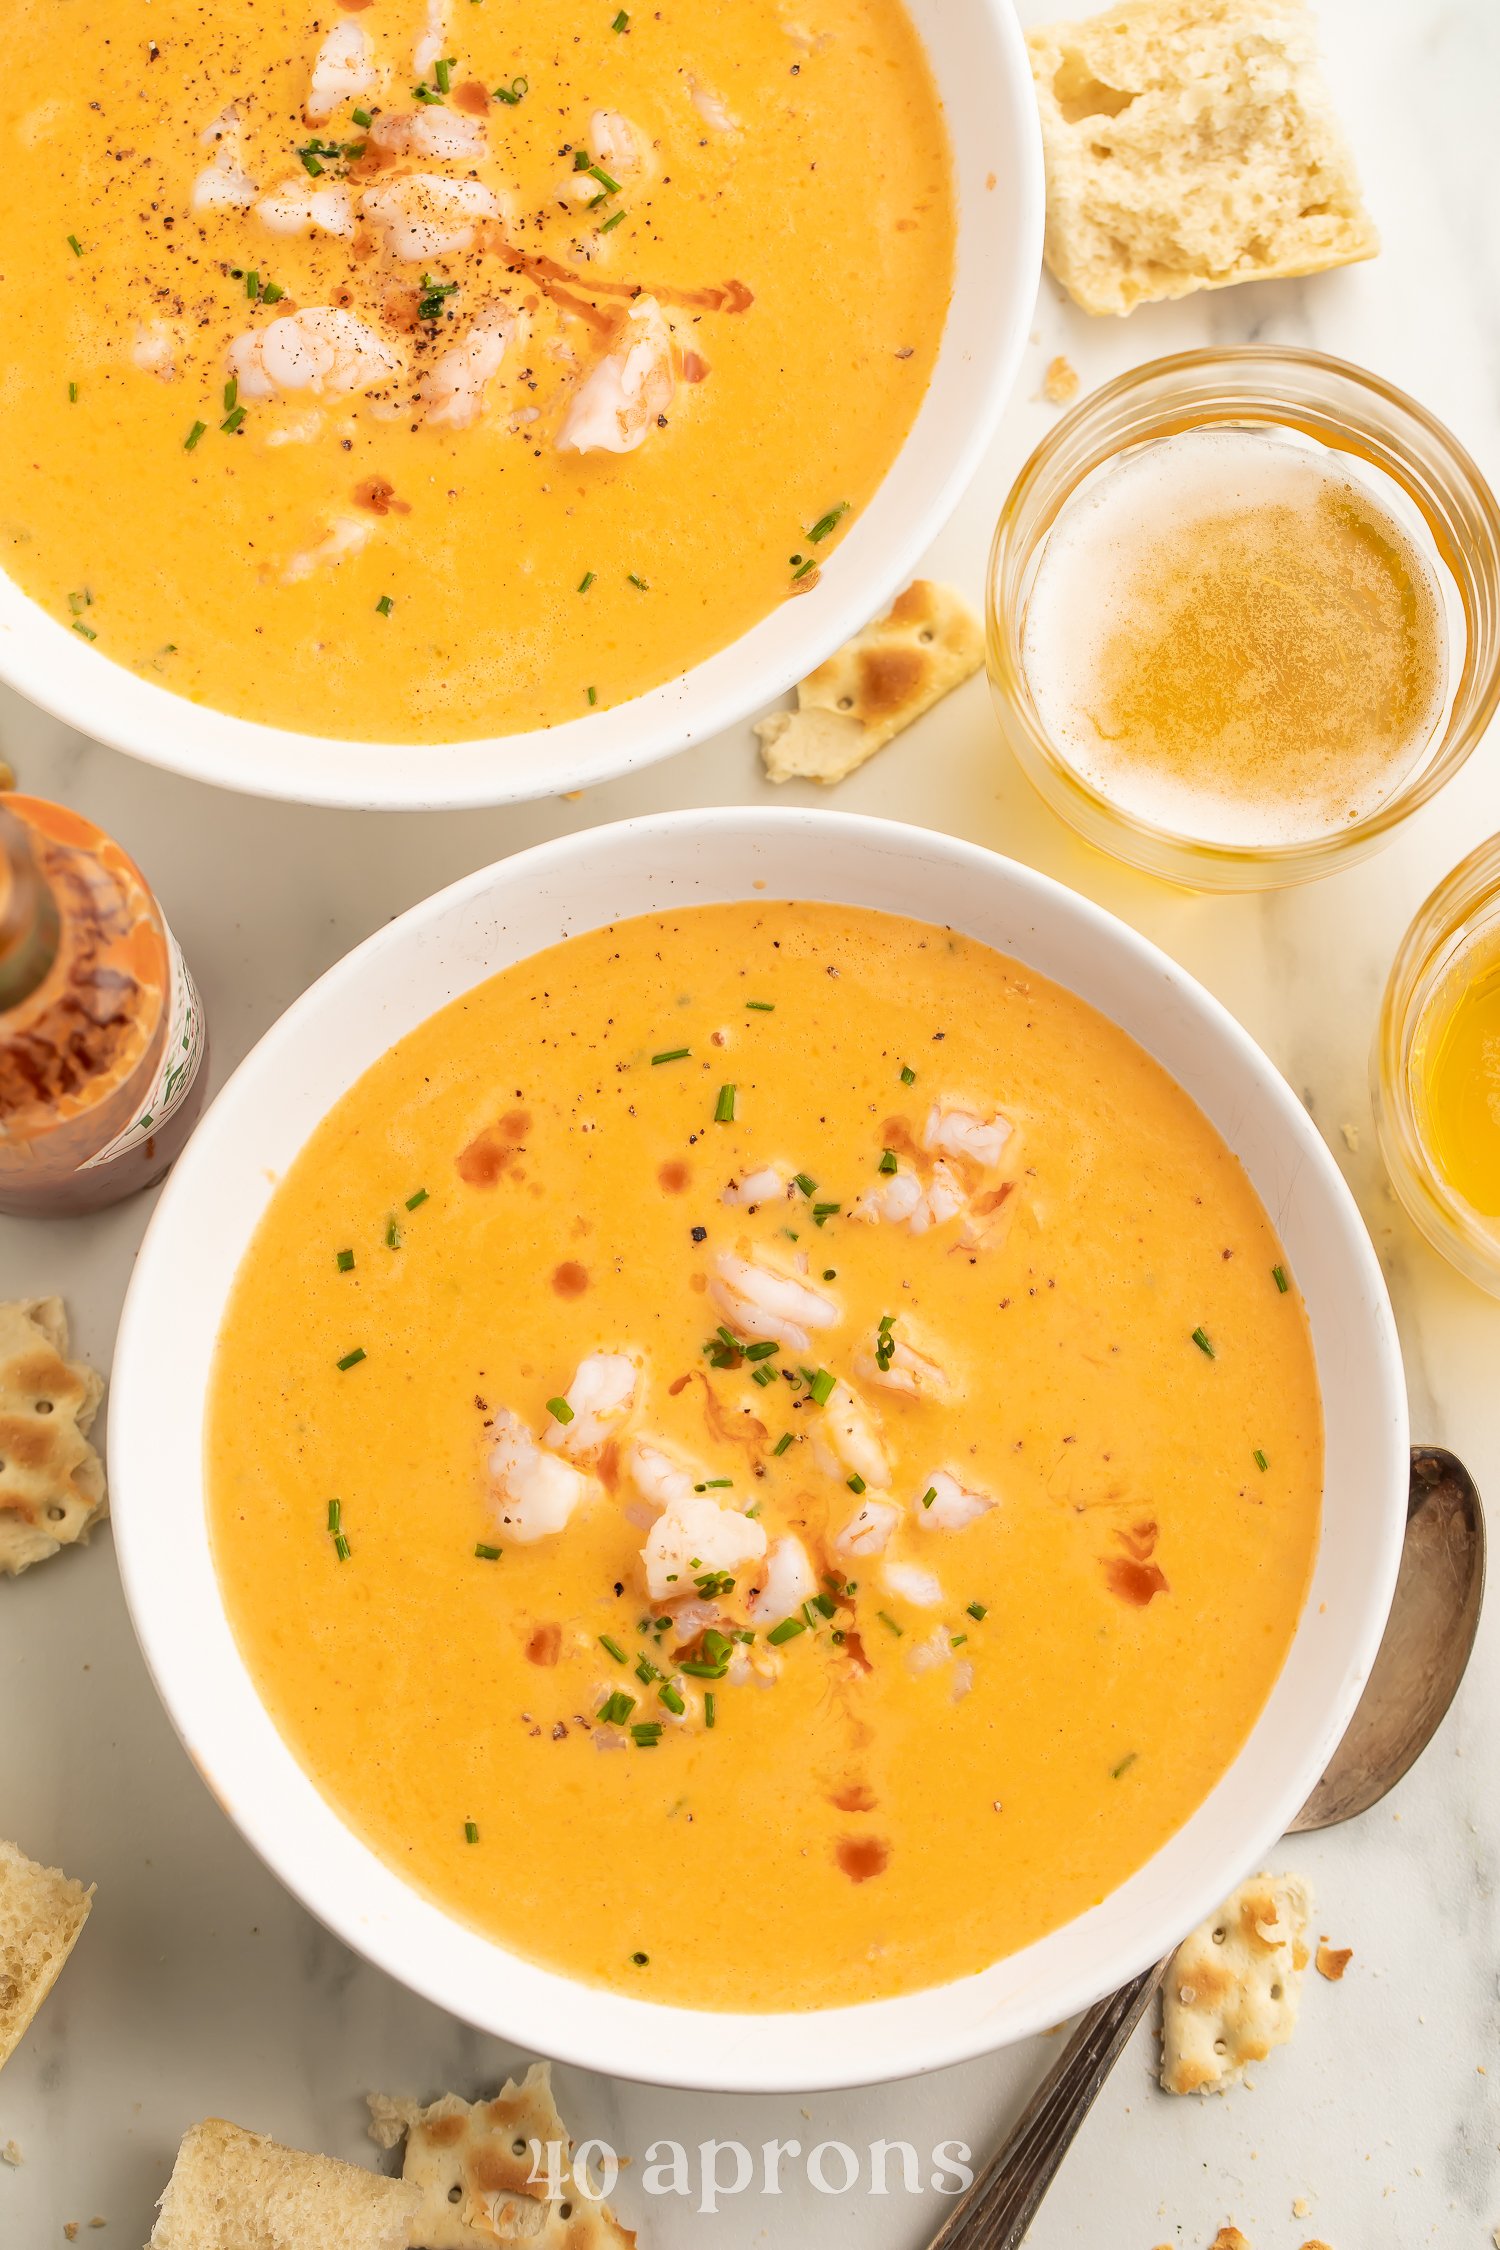 Creamy Seafood Bisque Recipe: How to Make It